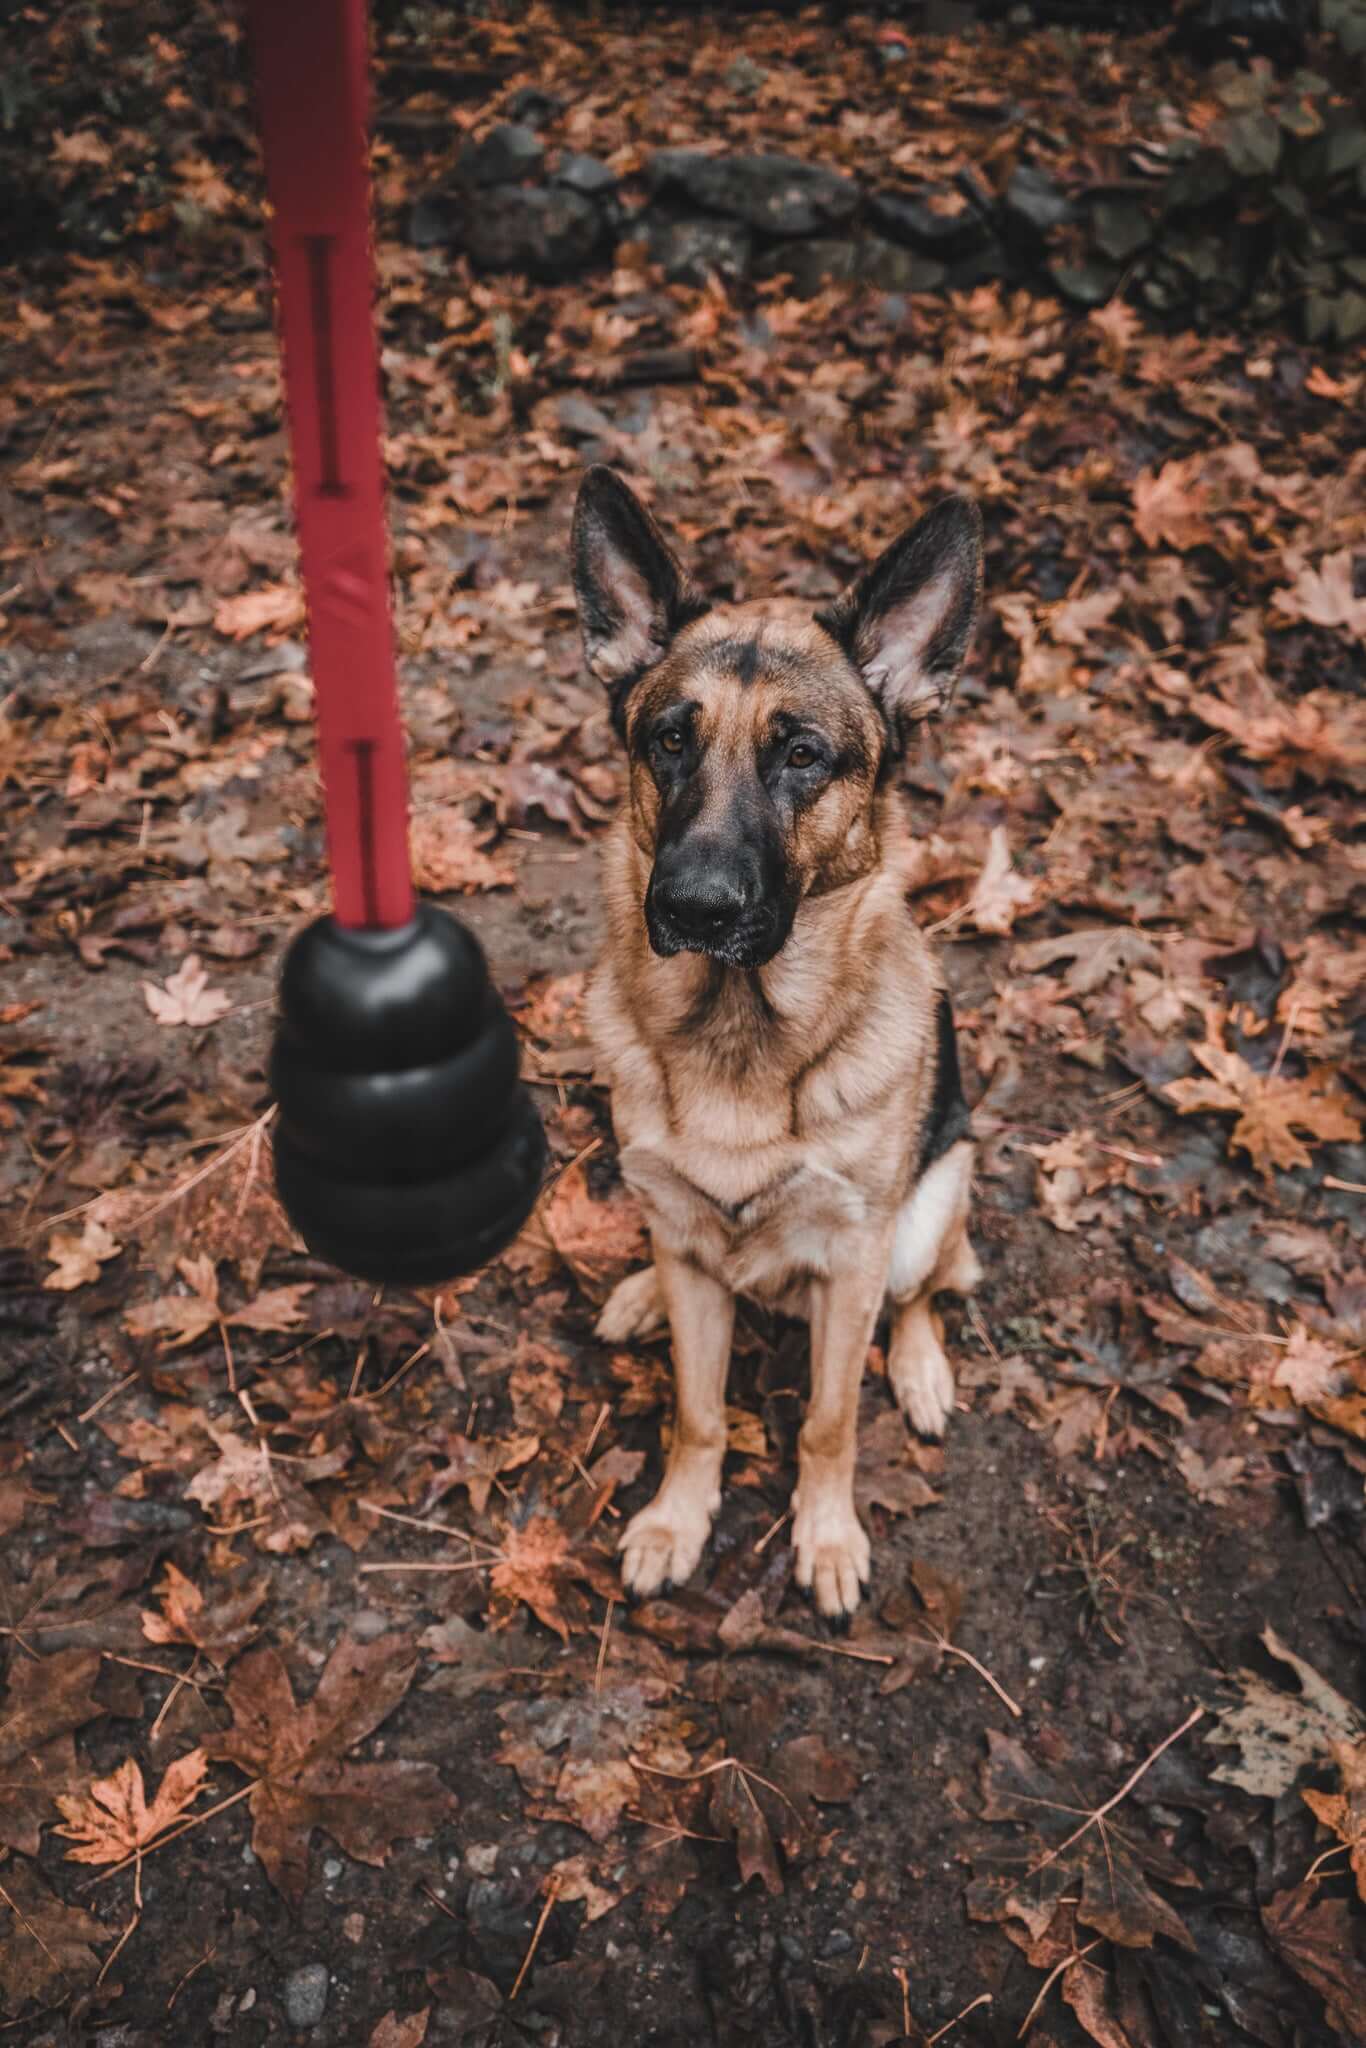 dog tug toy with a black kong toy on a bright red biothane rope held in front of a german shepherd dog with a background of leaves